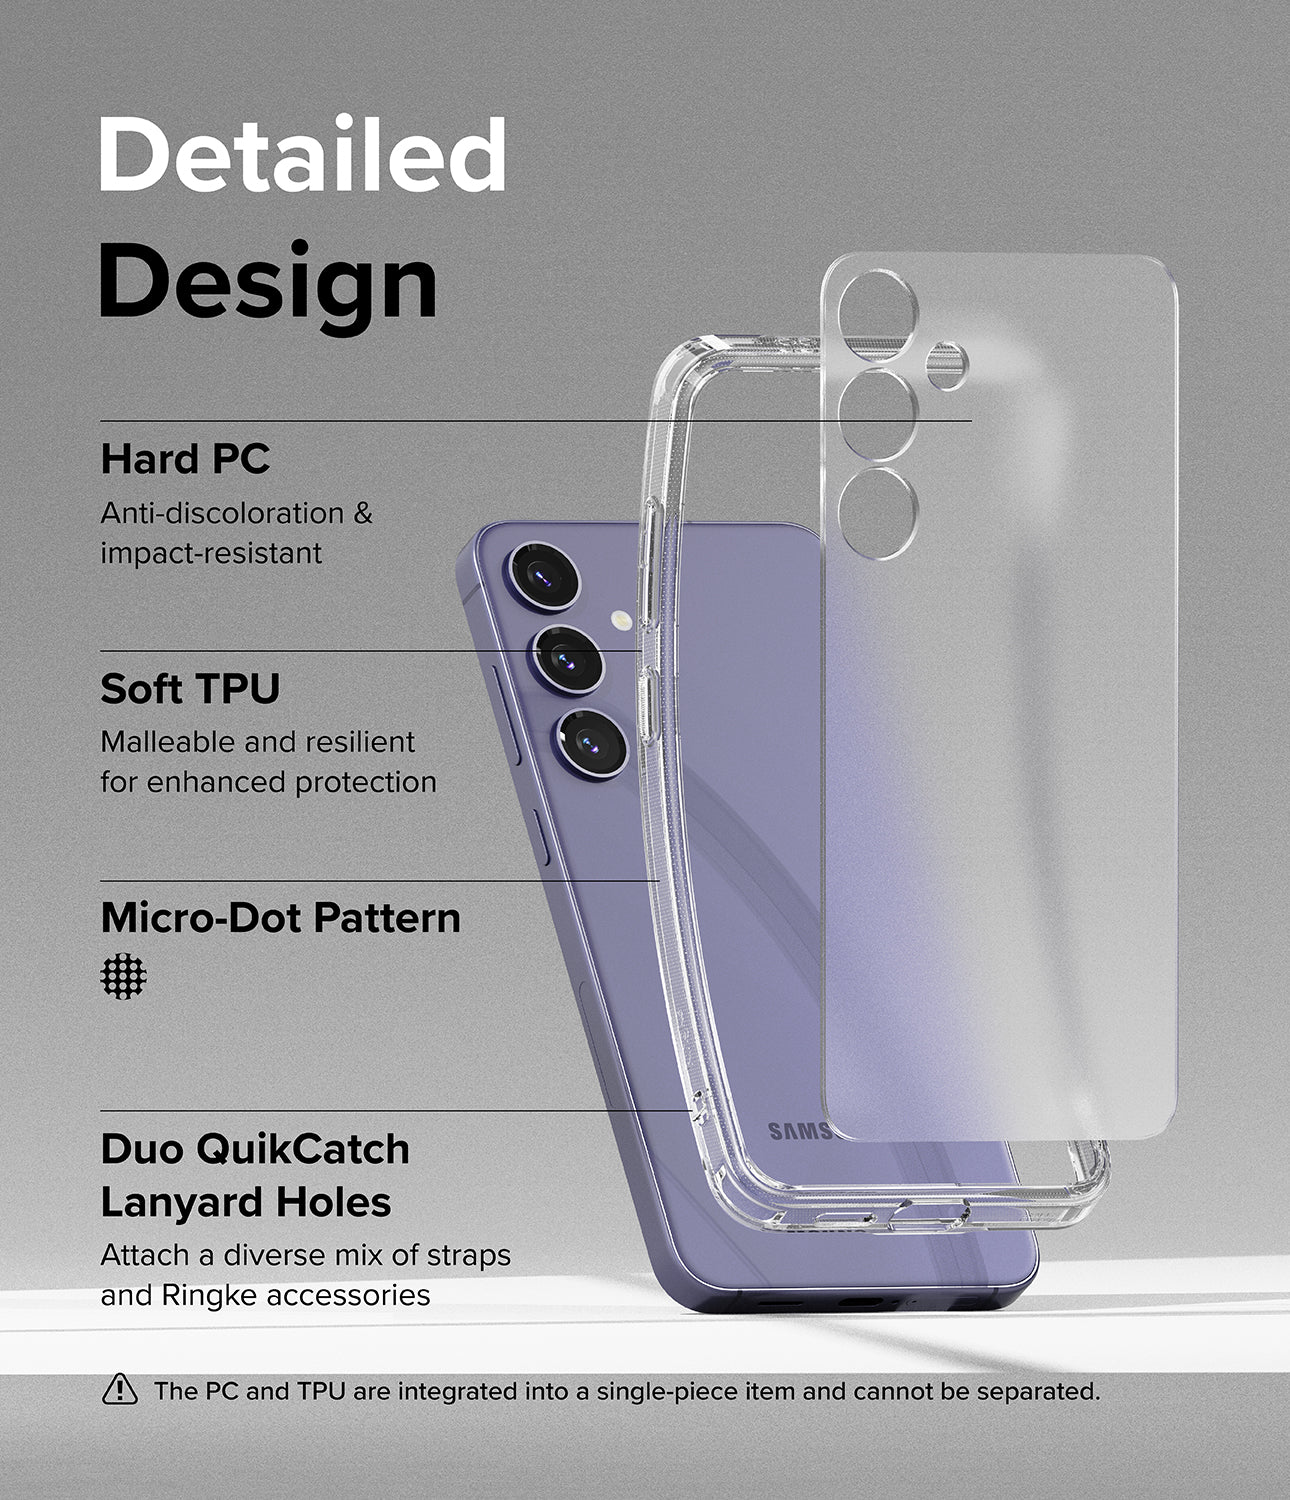 Galaxy S24 Plus Case | Fusion Matte - Detailed Design. Hard PC for anti-discoloration and impact-resistant. Soft TPU for malleable and resilient for enhanced protection. Micro-Dot Pattern. Duo QuikCatch Lanyard Holes to attach a diverse mix of straps and Ringke accessories.